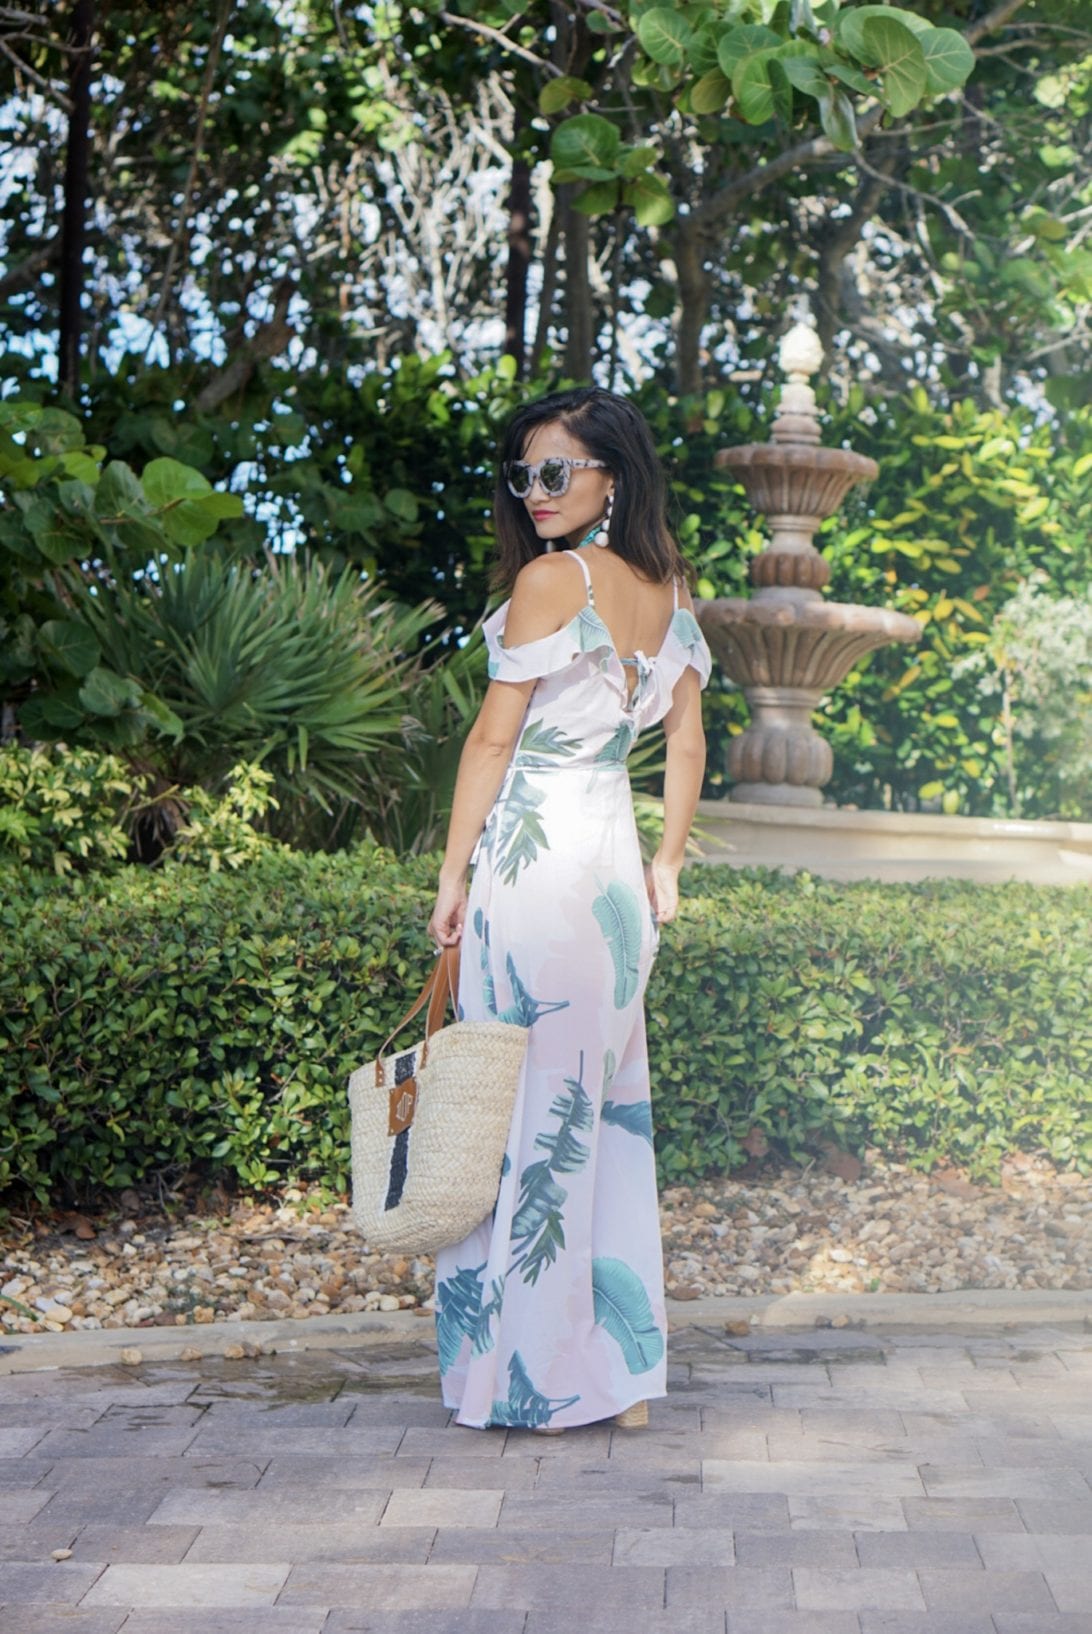 Palm Print Dress for Under $20, summer style, palm print dress, off the shoulder dress, monogrammed bag, turquoise necklace, quay sunglasses, vacation style, Mia sandals, Gigi Ghillie Sandal